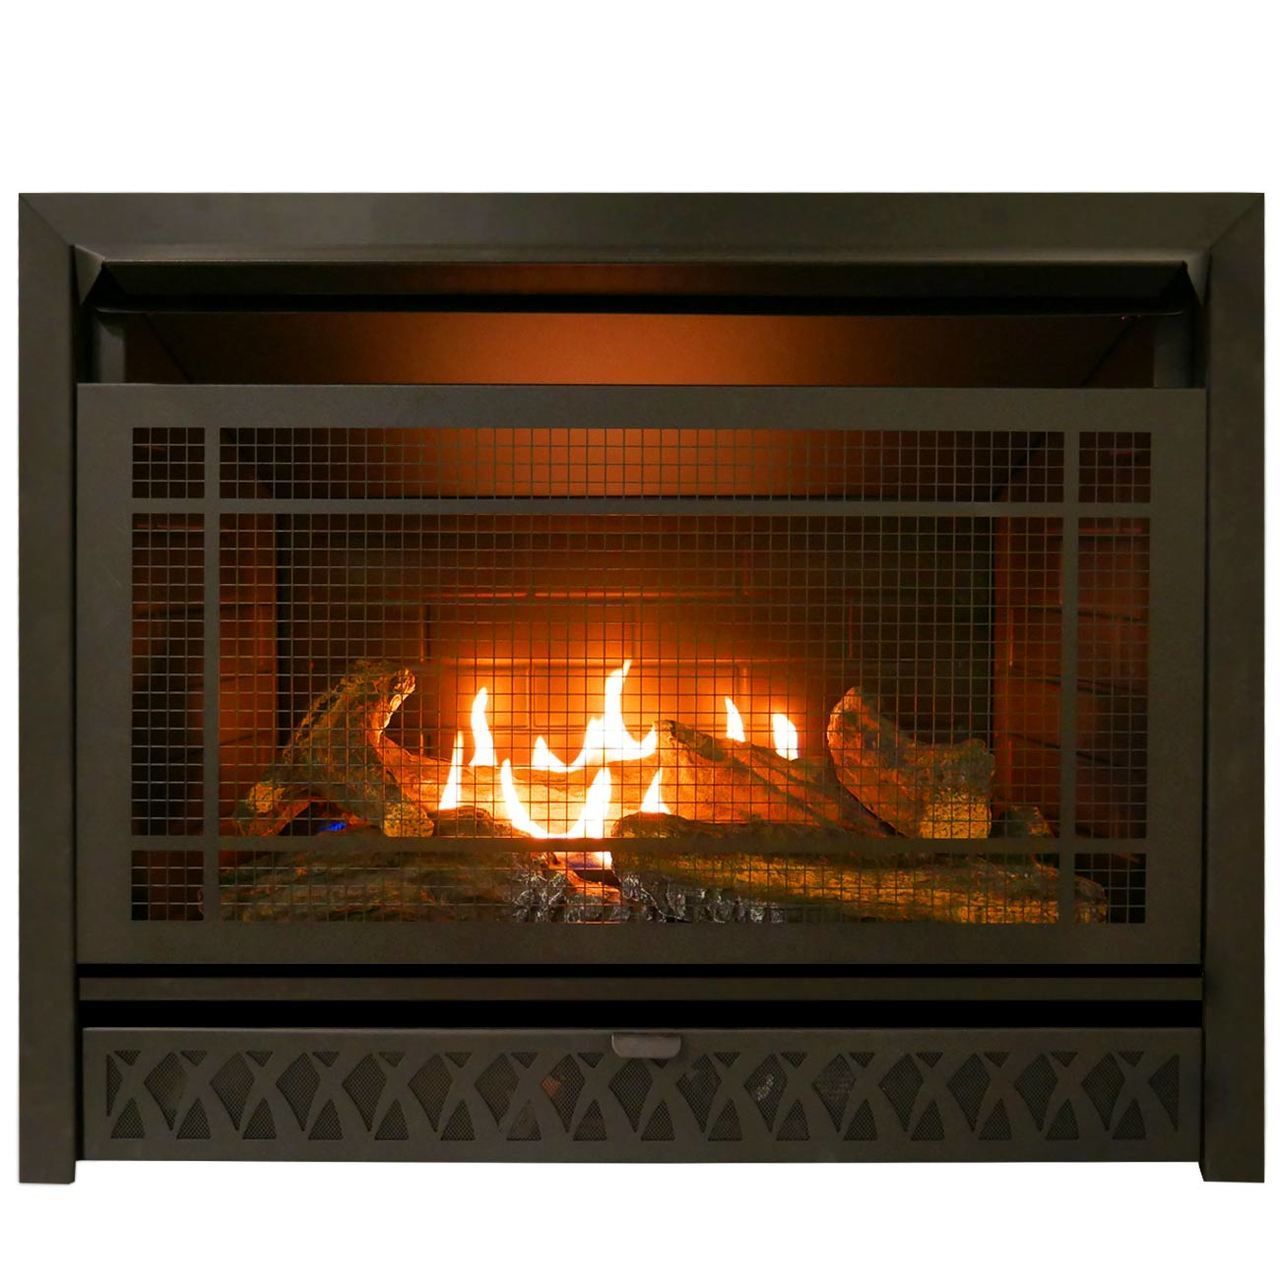 Marquis Fireplaces Fresh Pro Fireplaces 29 In Ventless Dual Fuel Firebox Insert